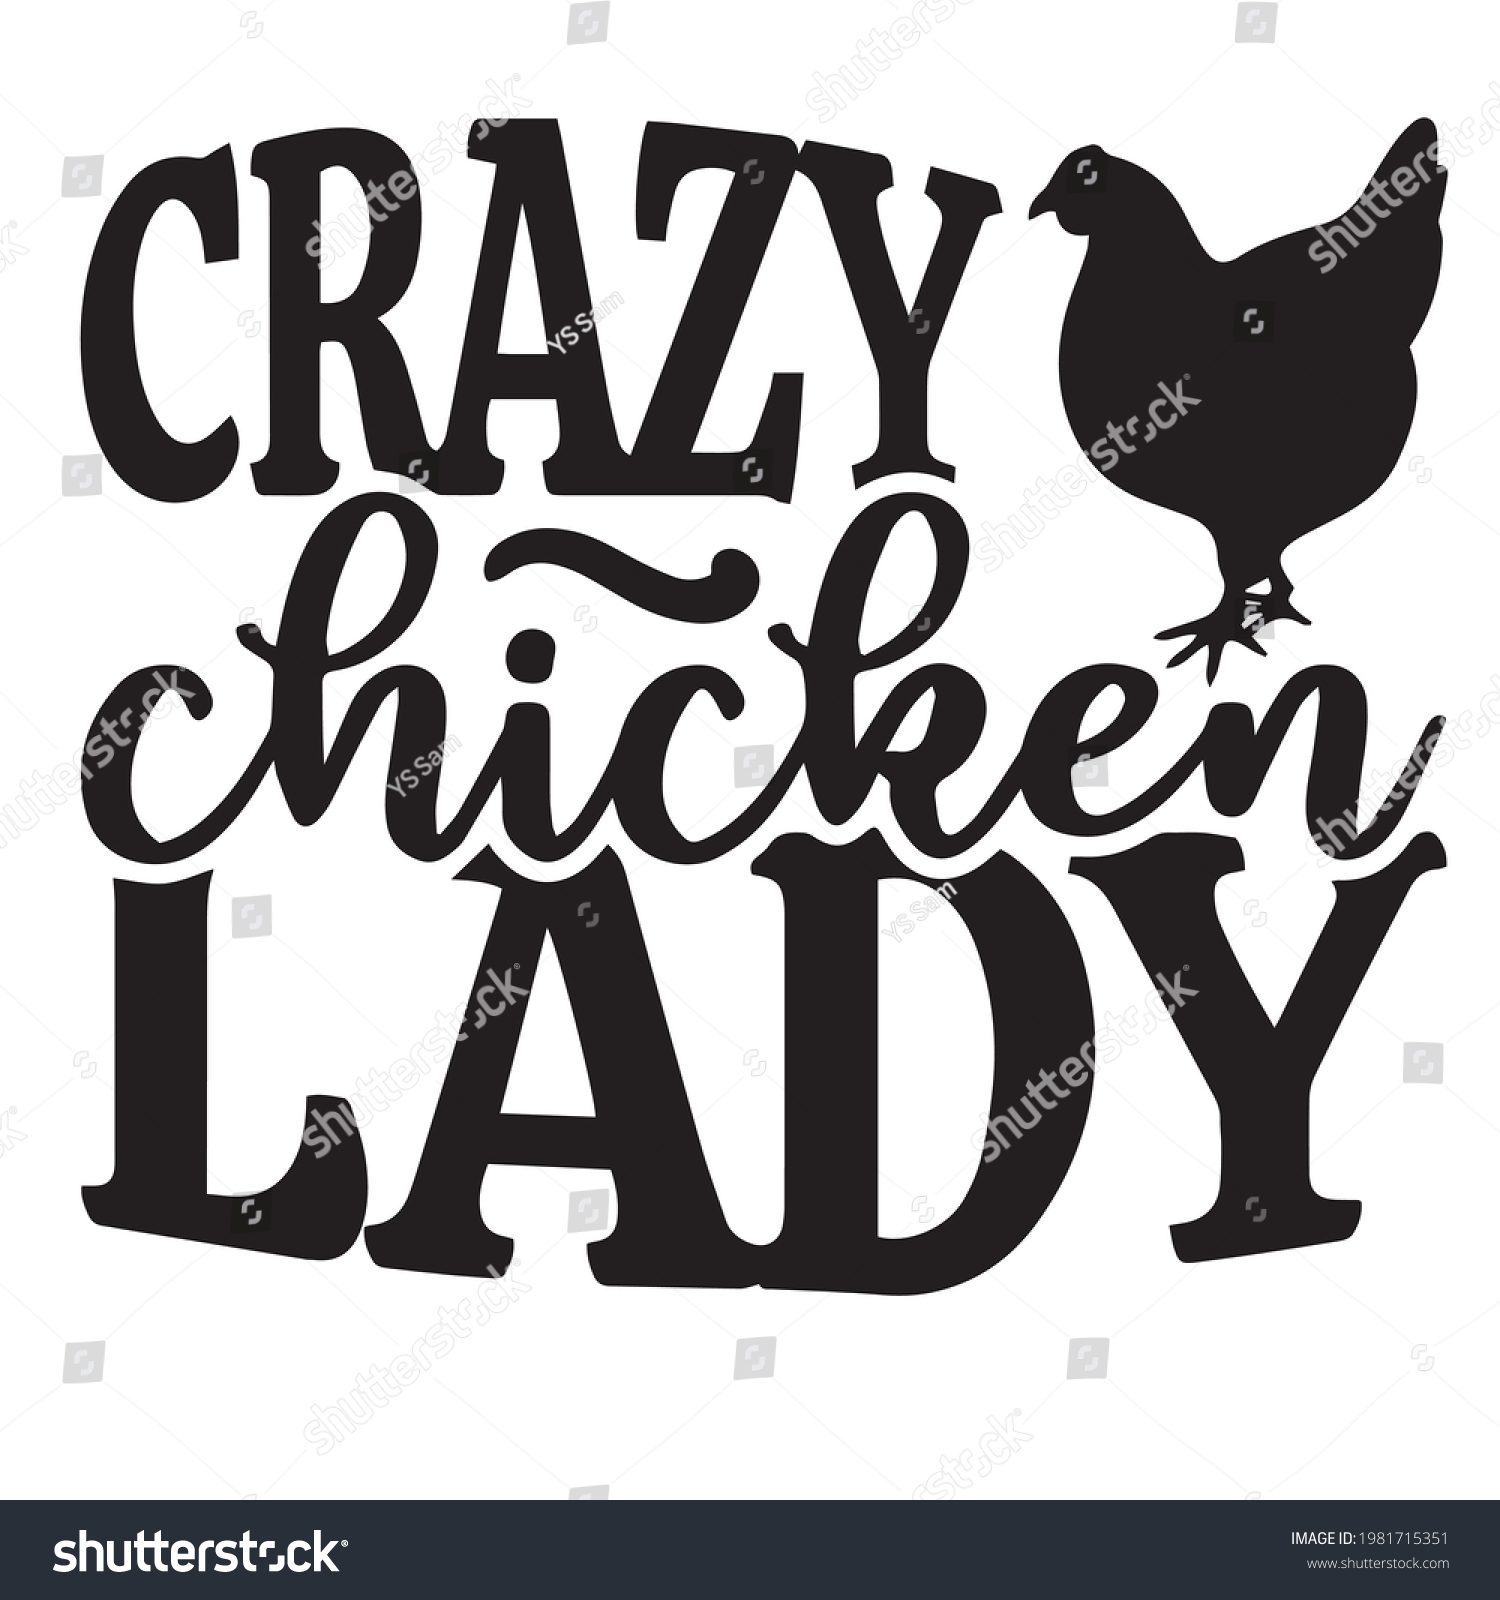 SVG of crazy chicken lady logo inspirational positive quotes, motivational, typography, lettering design svg